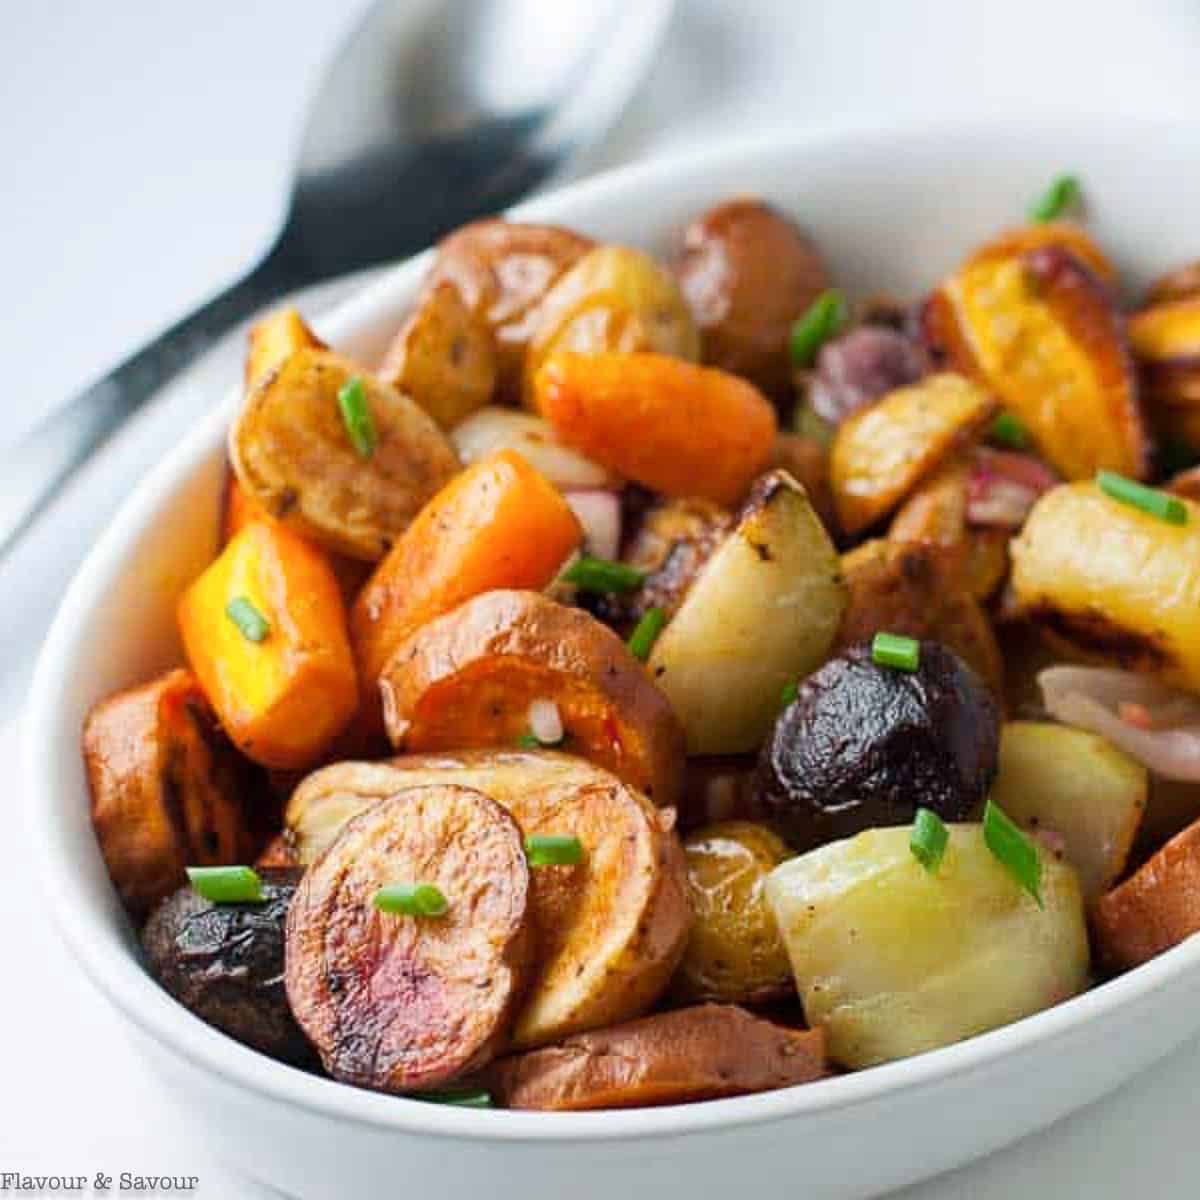 An oval bowl filled with roasted root vegetables.